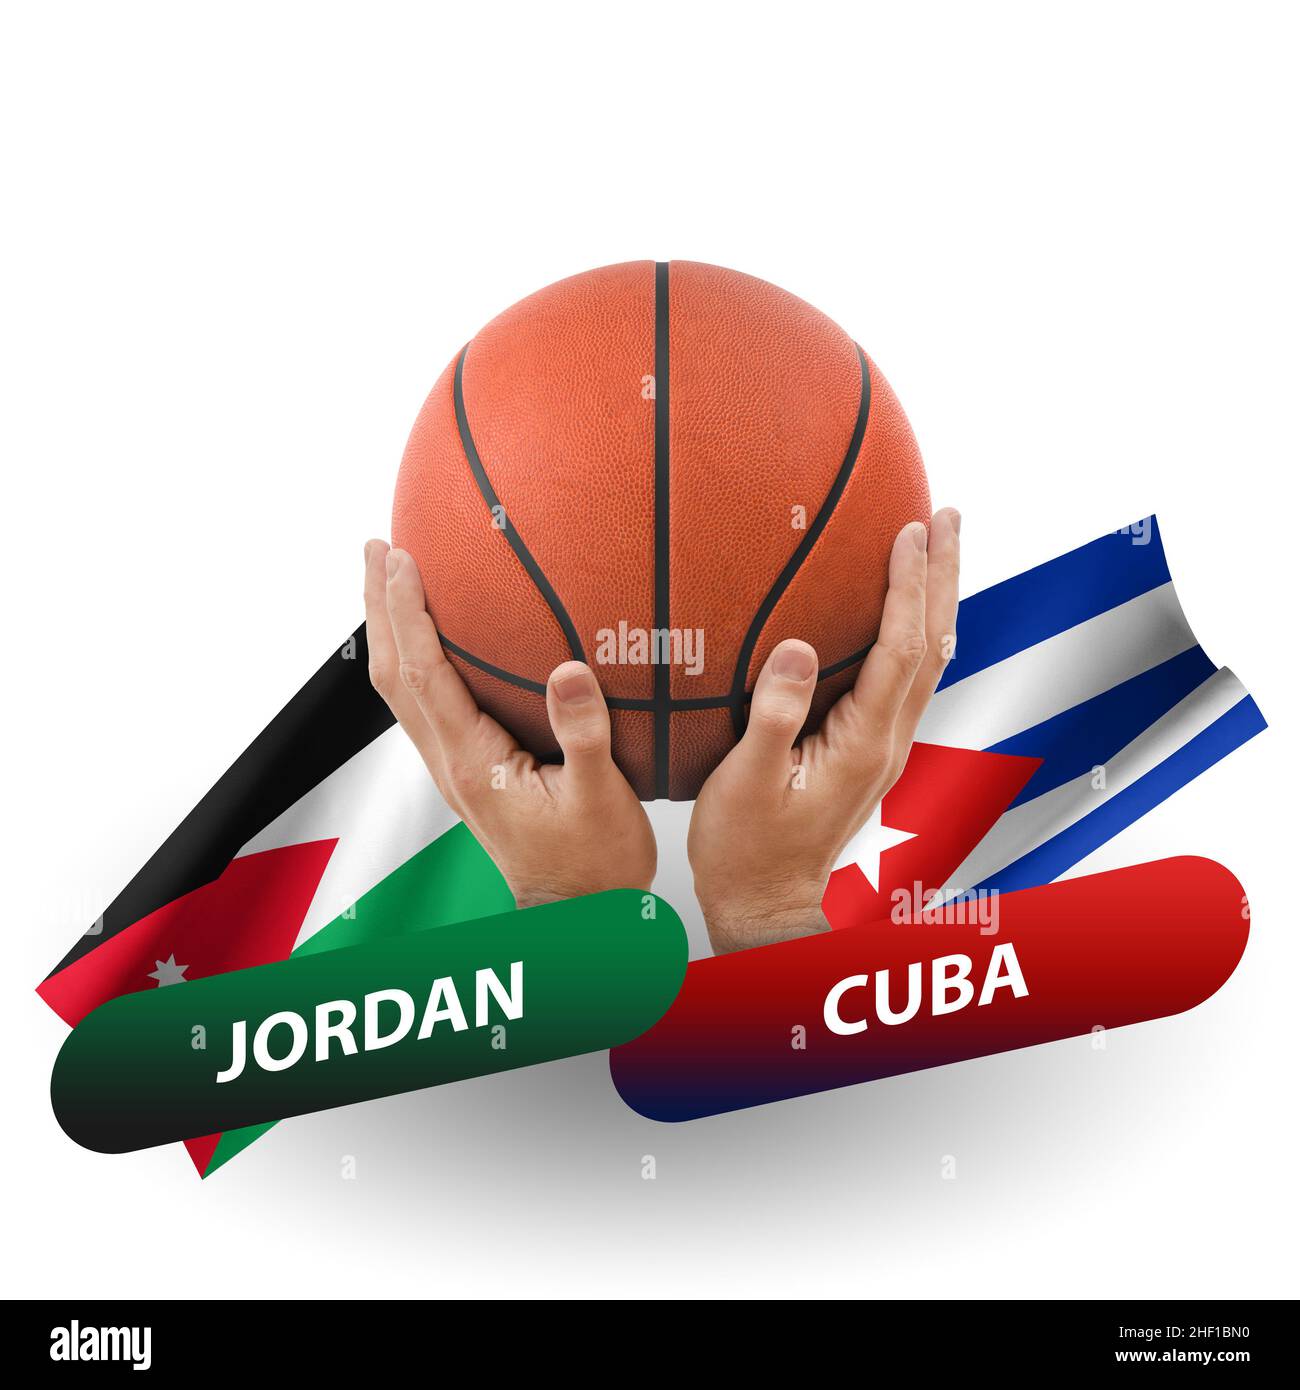 Jordan and cuba Cut Out Stock Images & Pictures - Alamy